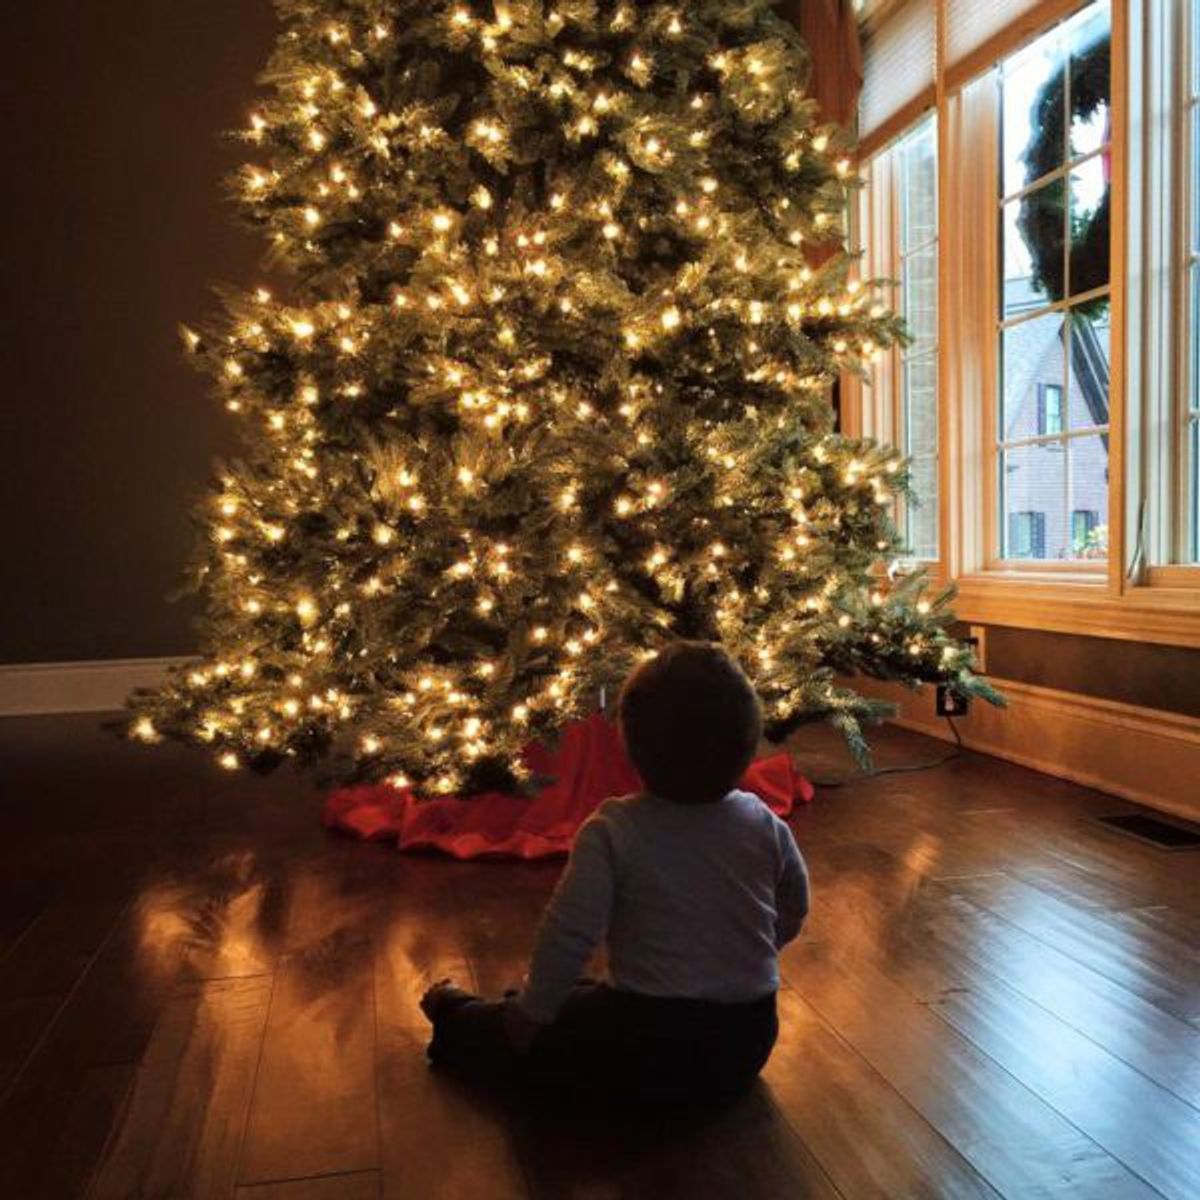 What We All Have To Learn About Christmas From The Little Boy Who Got An Avocado